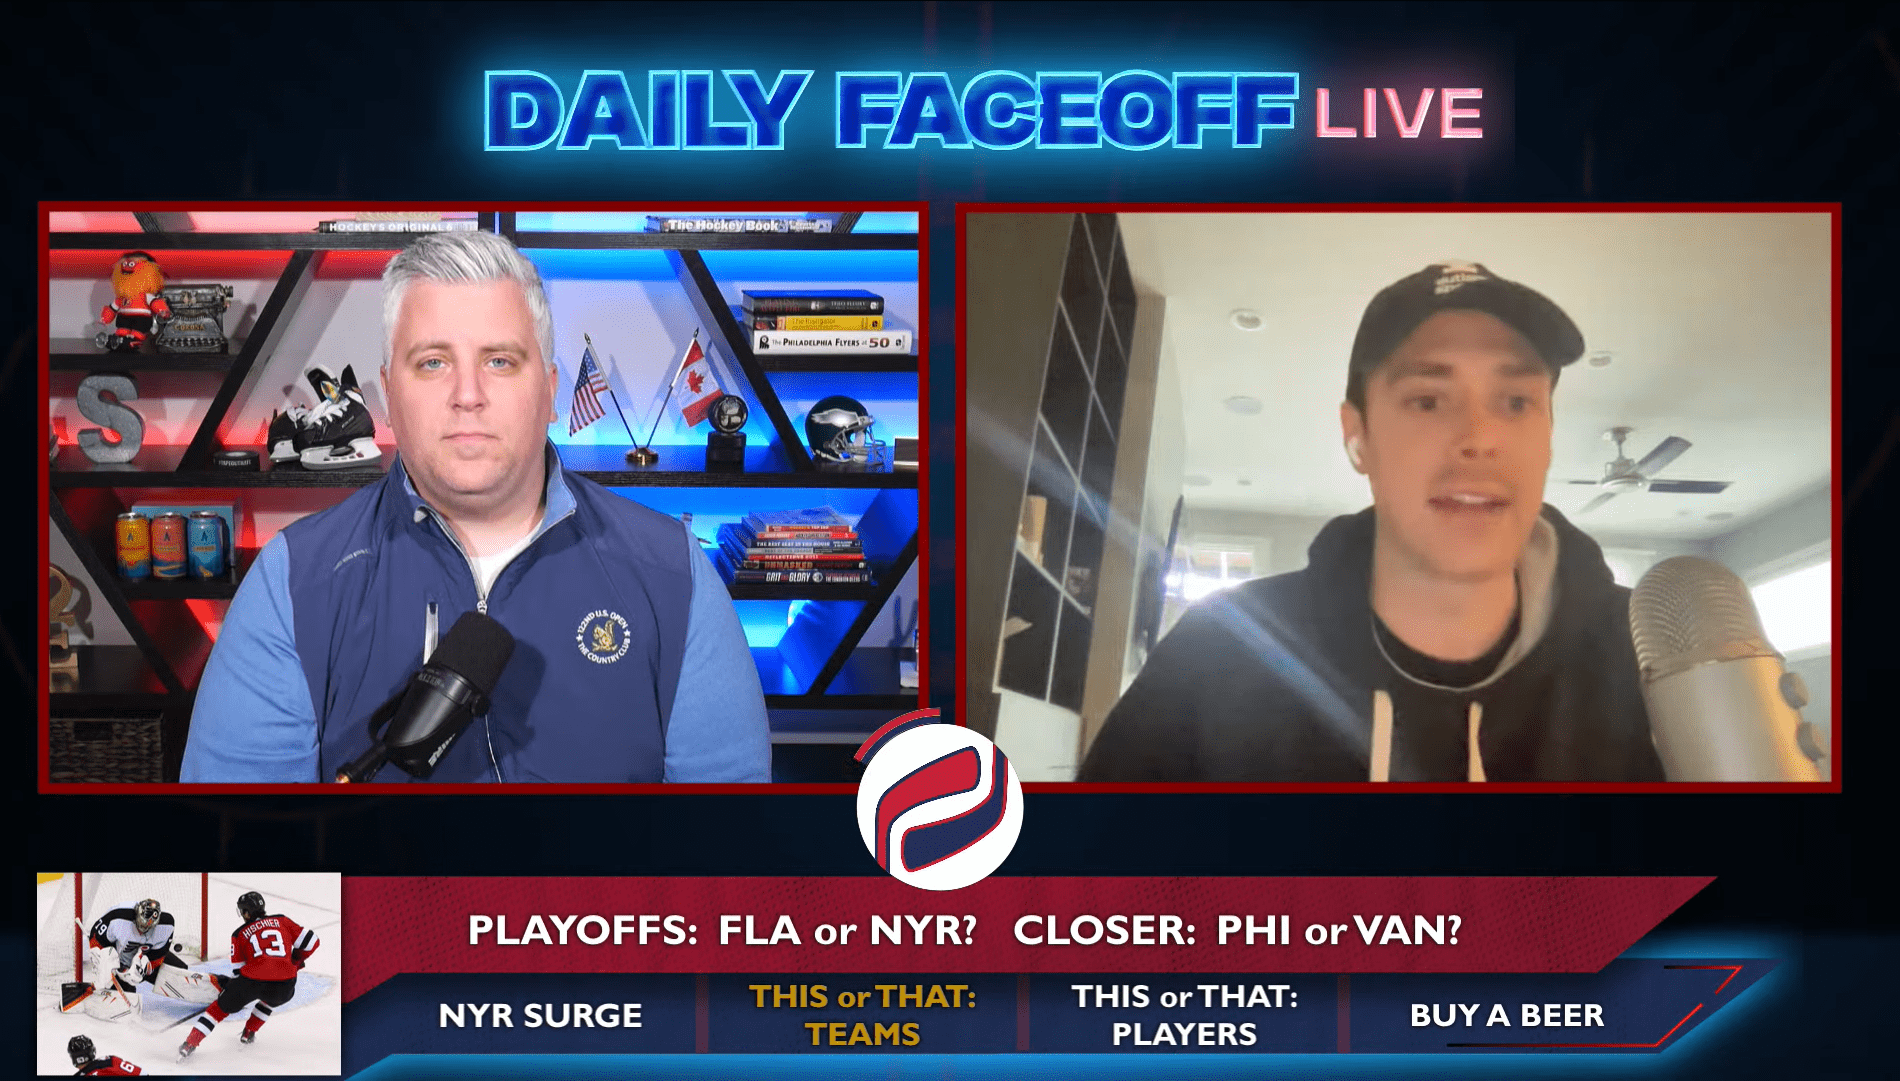 Daily Faceoff Live: Will the Vancouver Canucks or Philadelphia Flyers make the playoffs first?